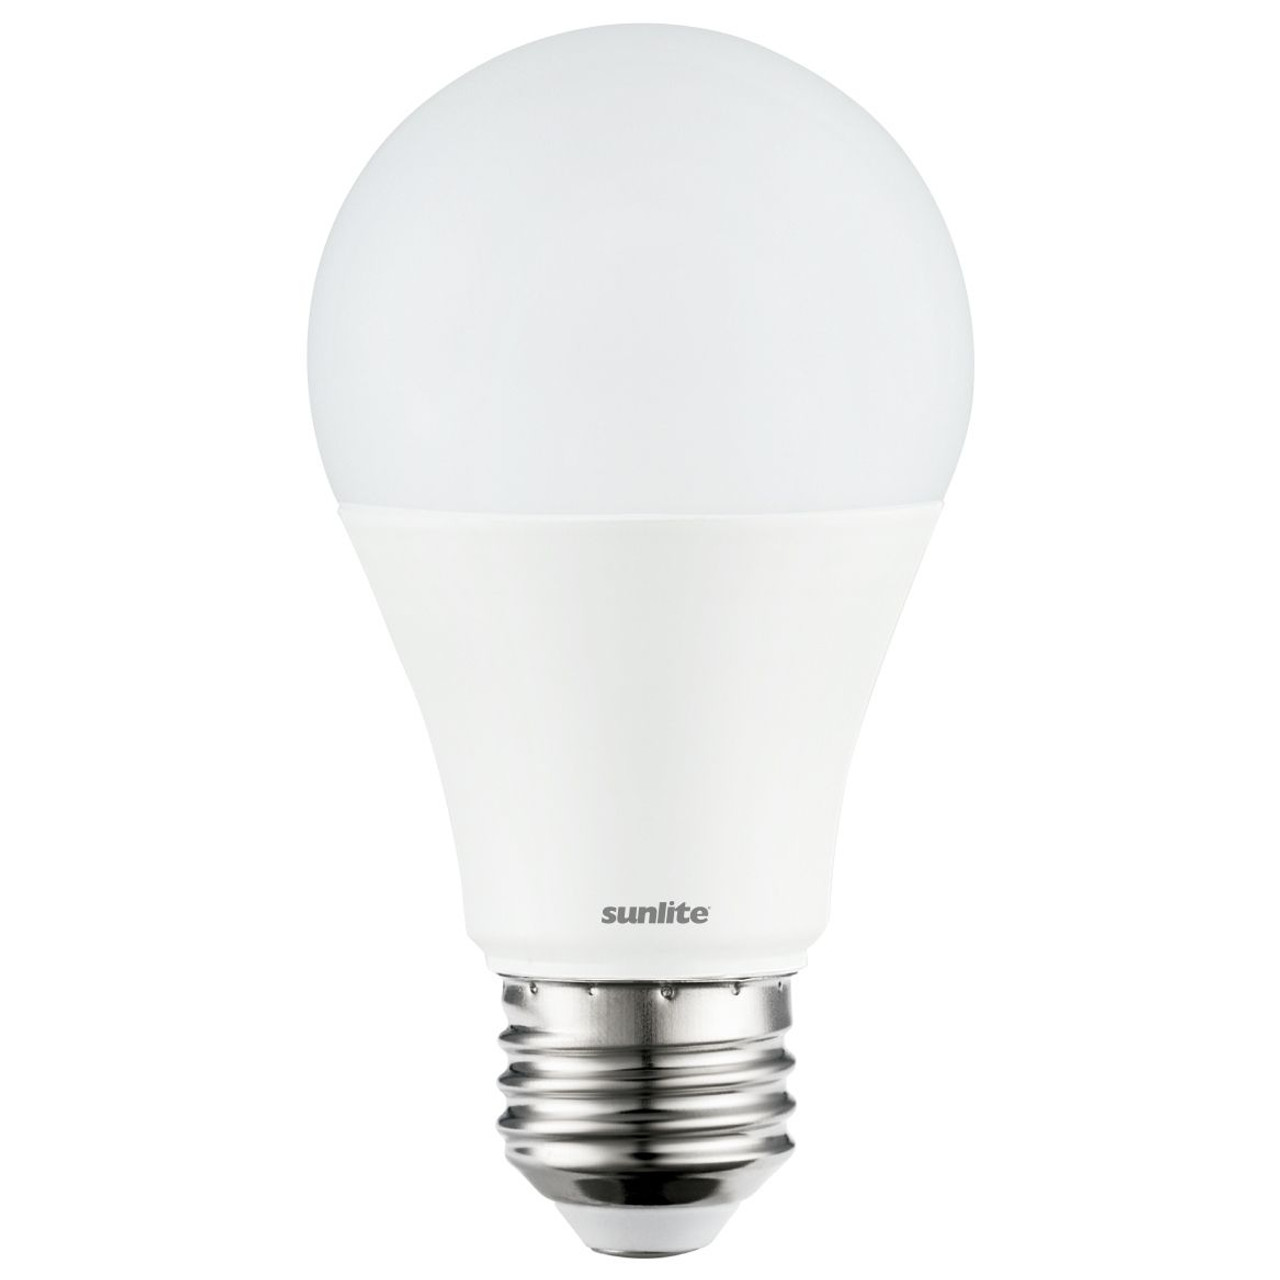 Sunlite - Replacement Bulb - 9W, 120V, Cool White, 4000K, 800Lm - Apollo Lighting